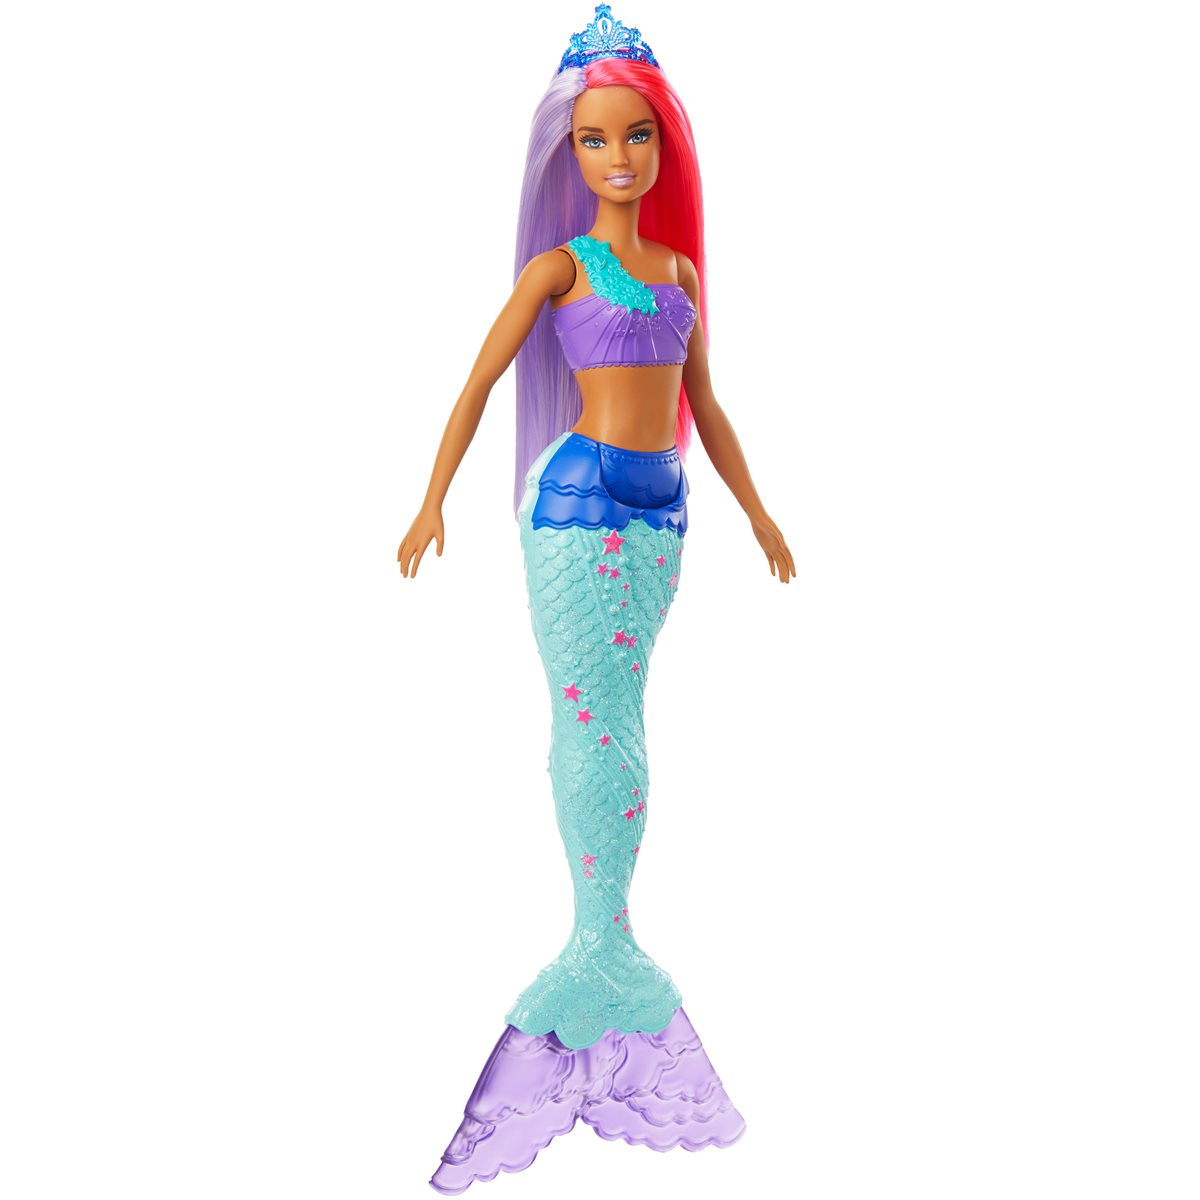 Barbie Dreamtopia Mermaid Doll with Purple and Coral Hair